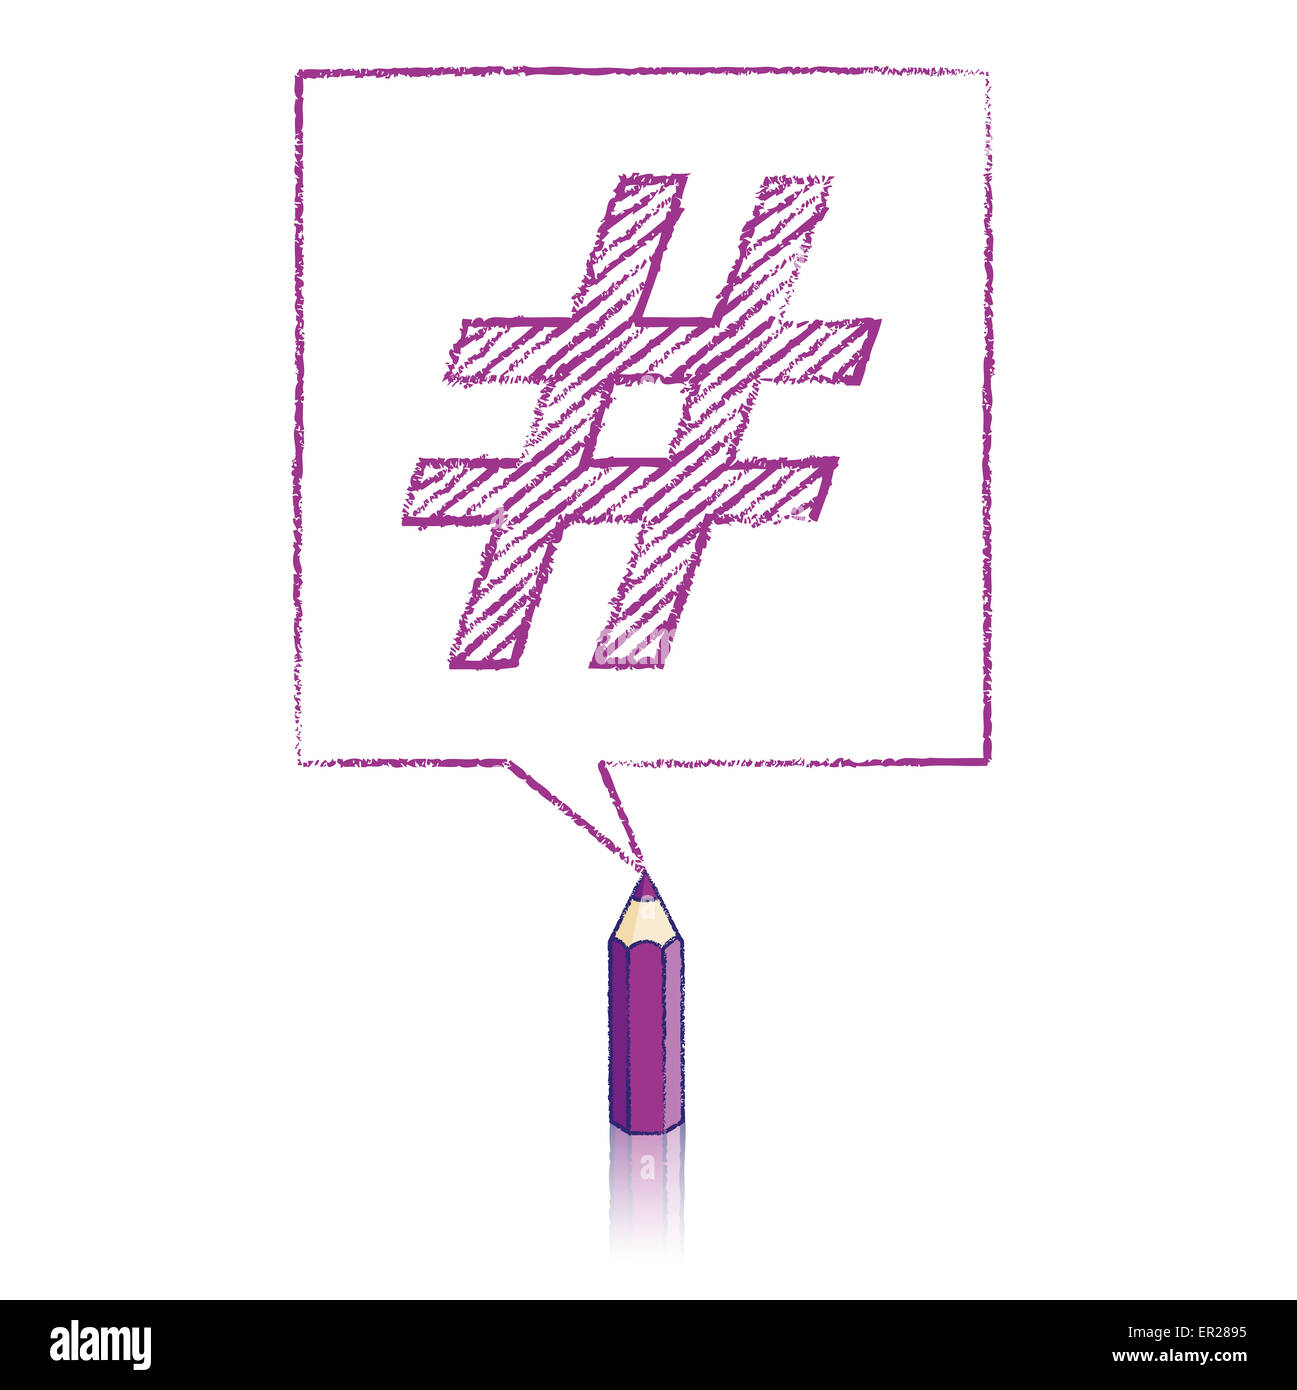 Sam Flores - #Hashtag Mural Sketches – #Hashtag Gallery